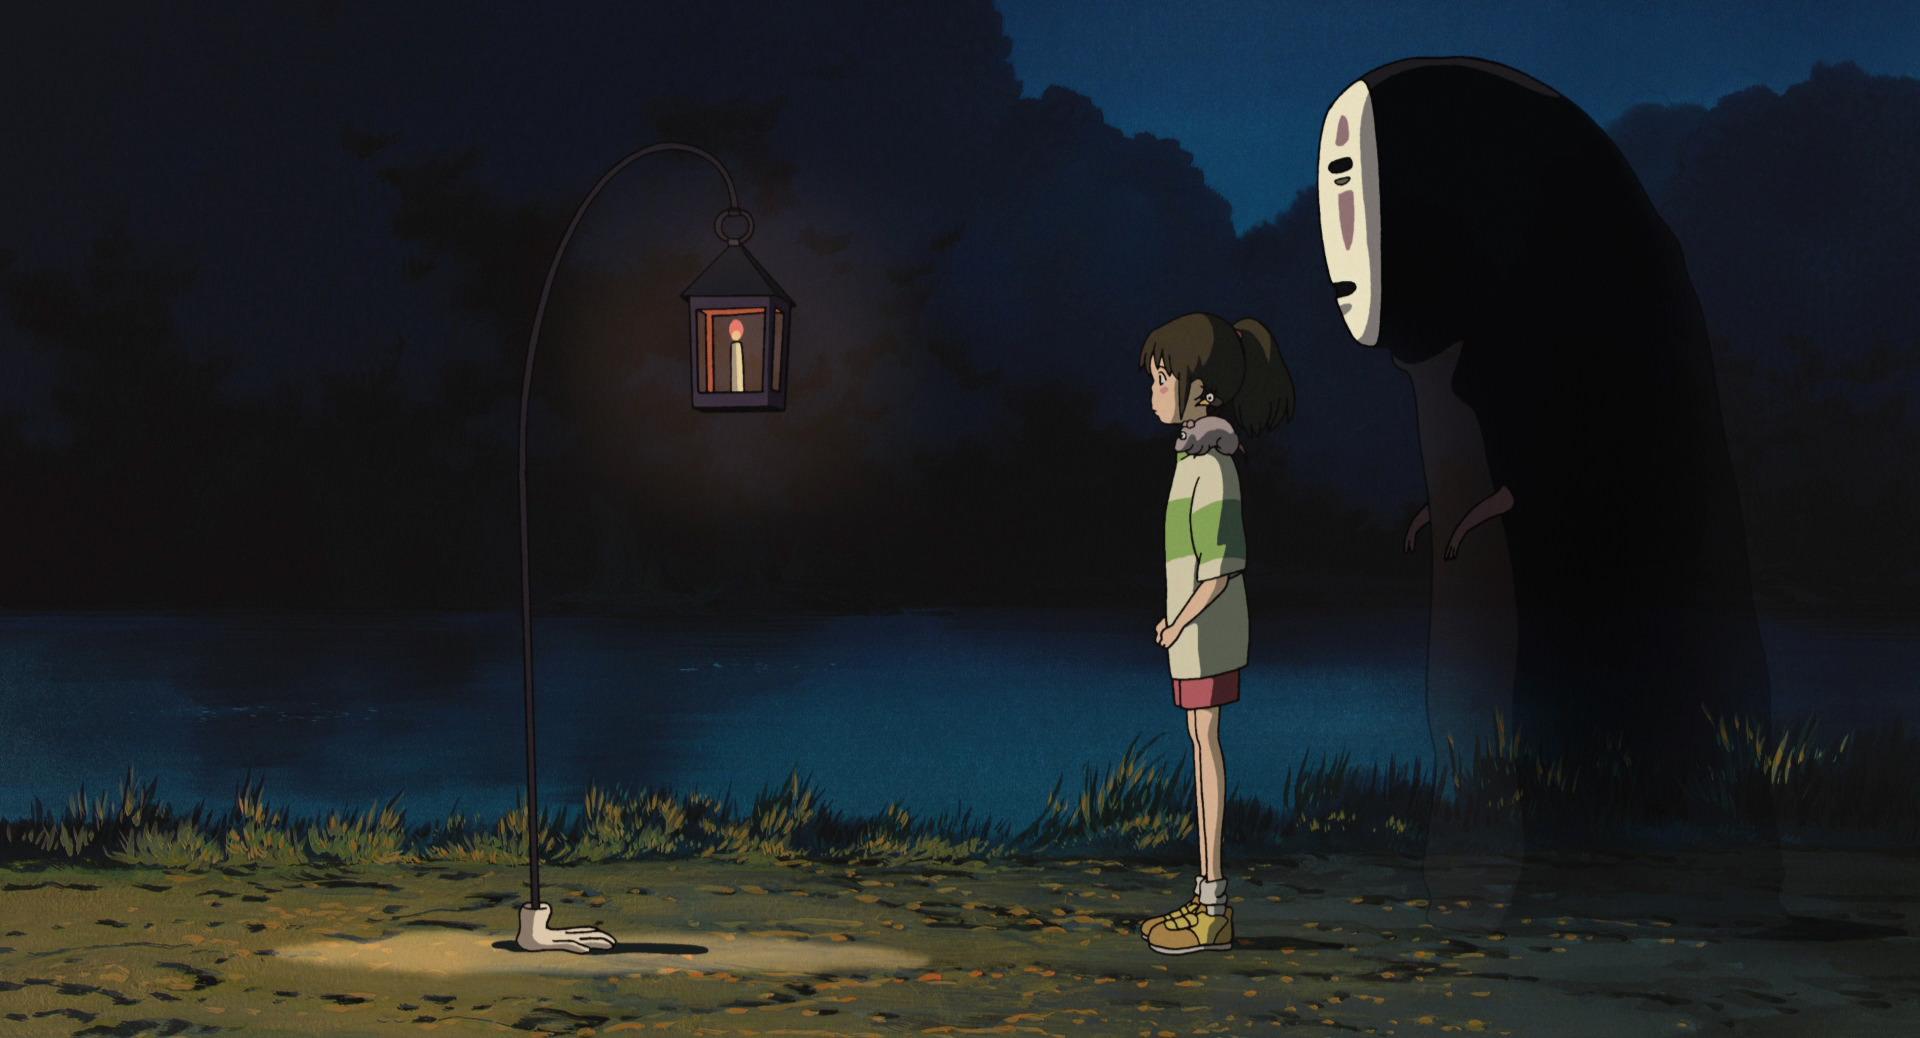 Image gallery for Spirited Away.